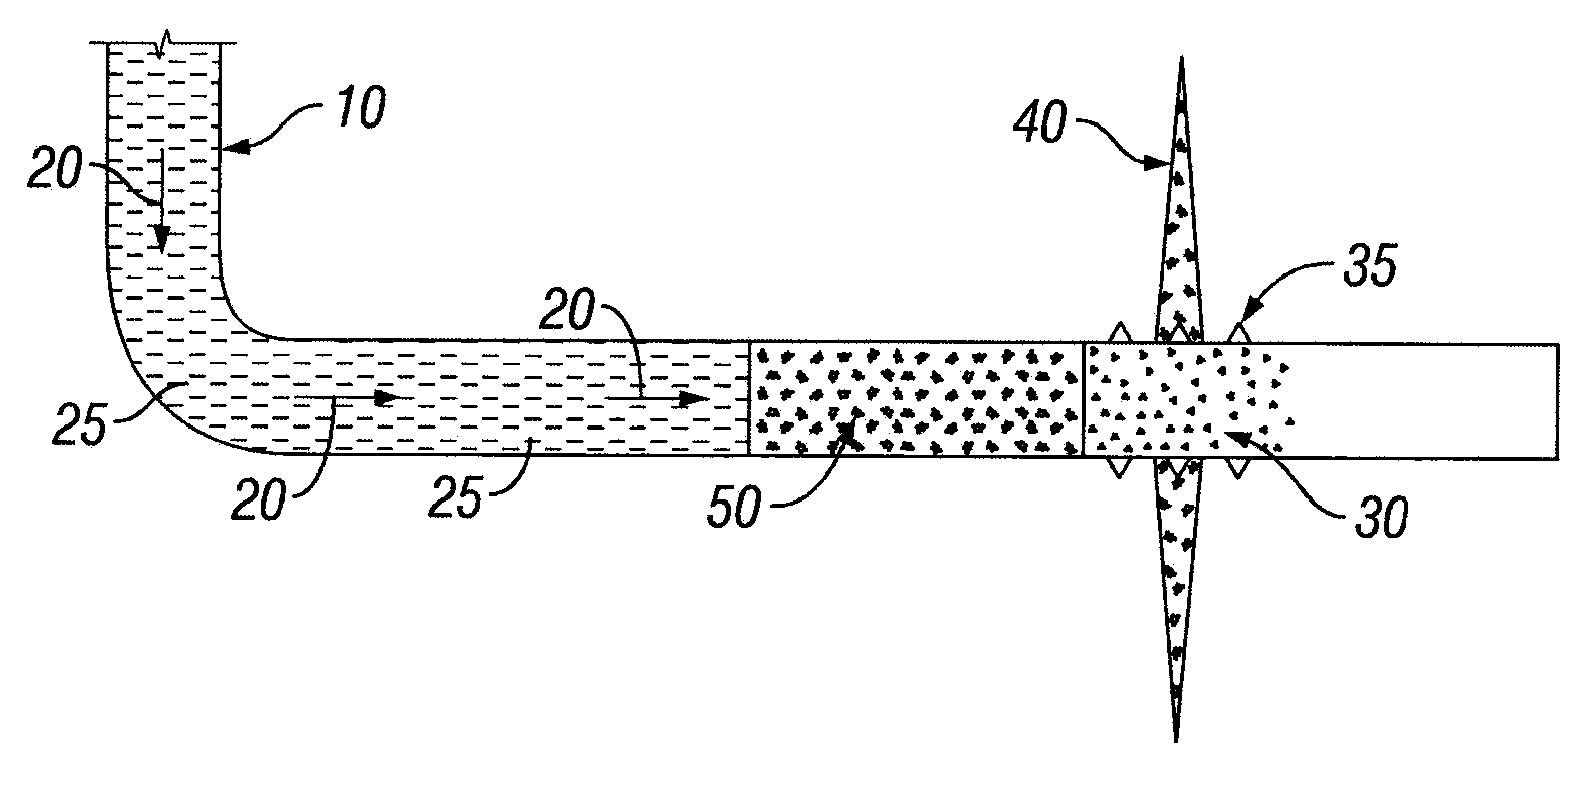 Method of isolating open perforations in horizontal wellbores using an ultra lightweight proppant